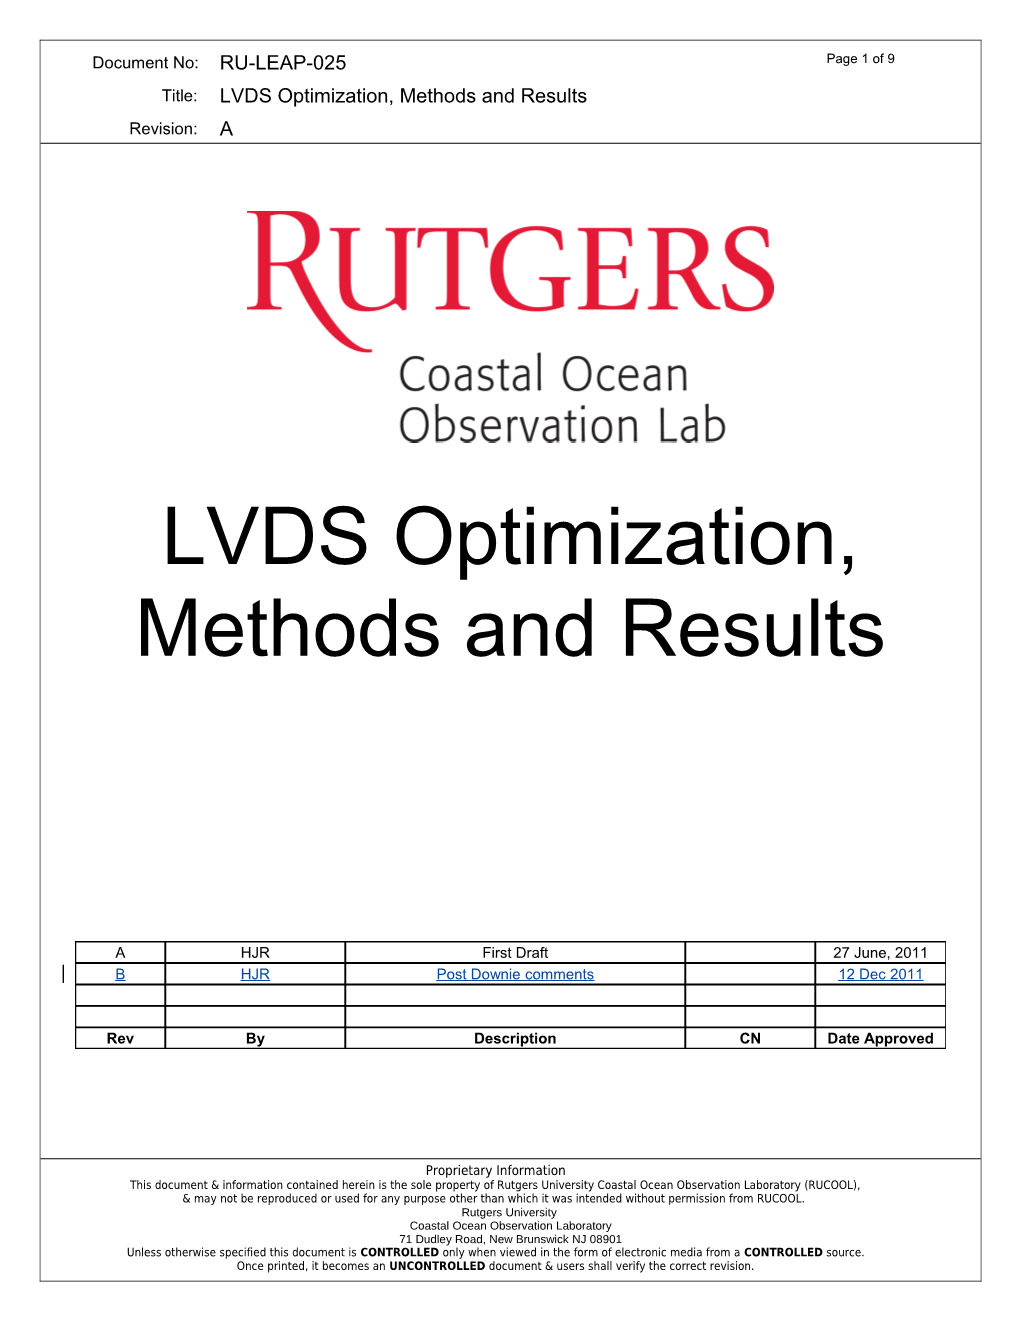 LVDS Optimization, Methods and Results